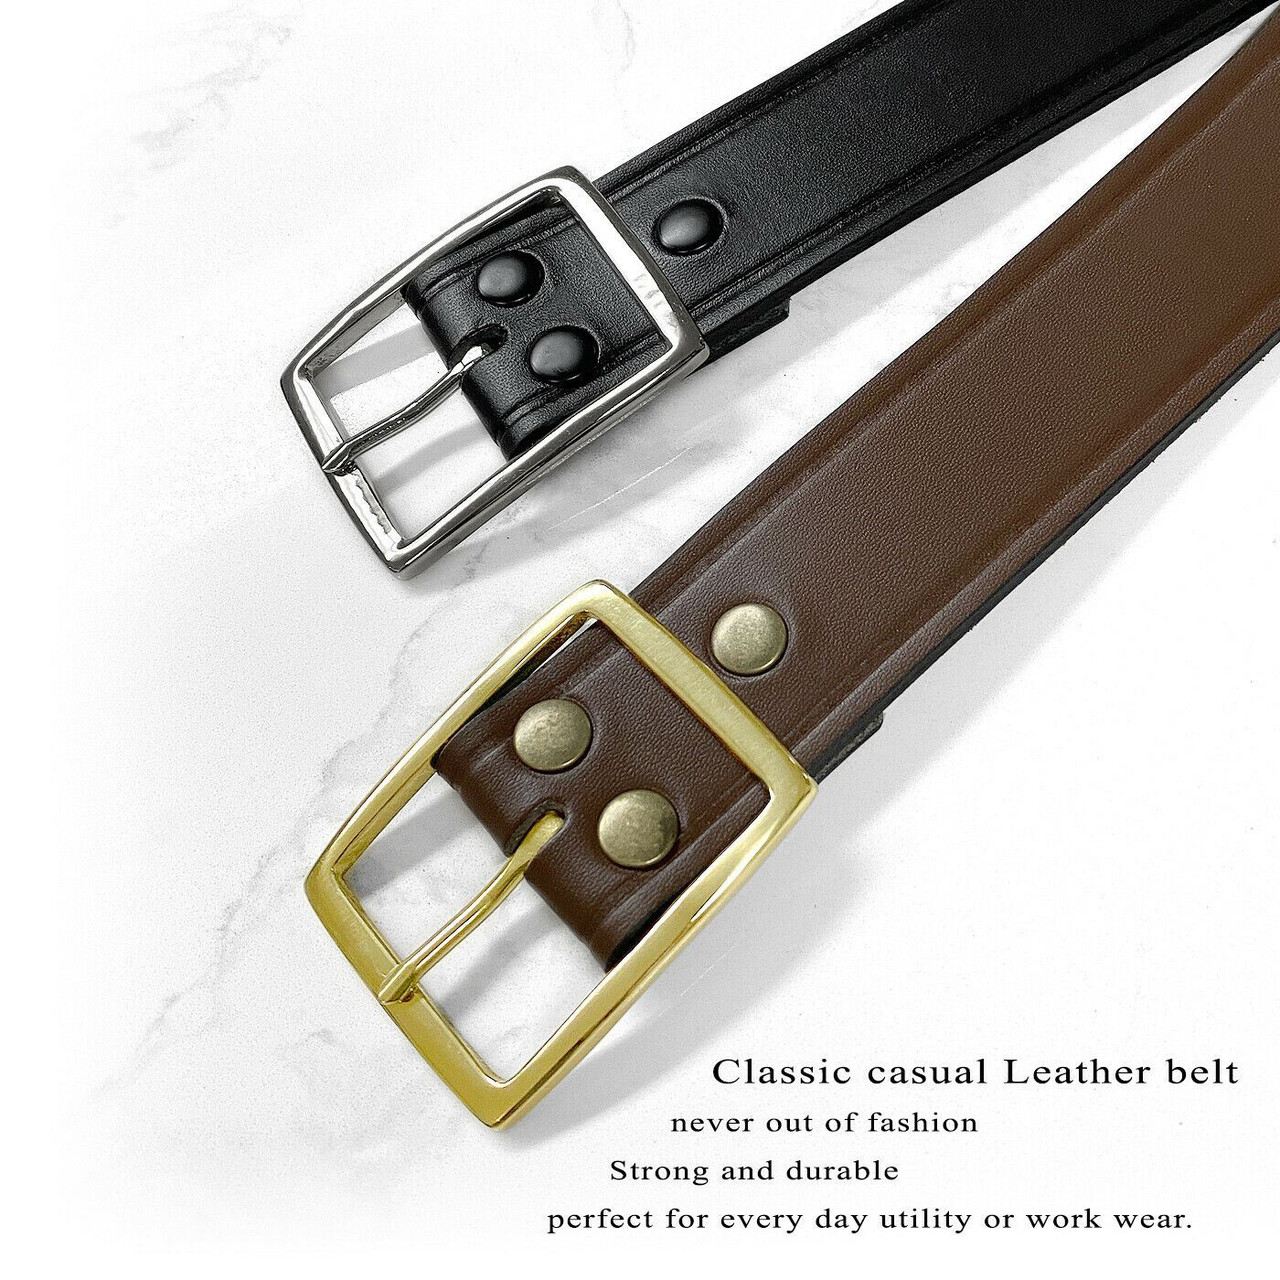 Premium Leather Belts 1 3/4 ” wide - Log Cabin Leather by Jan